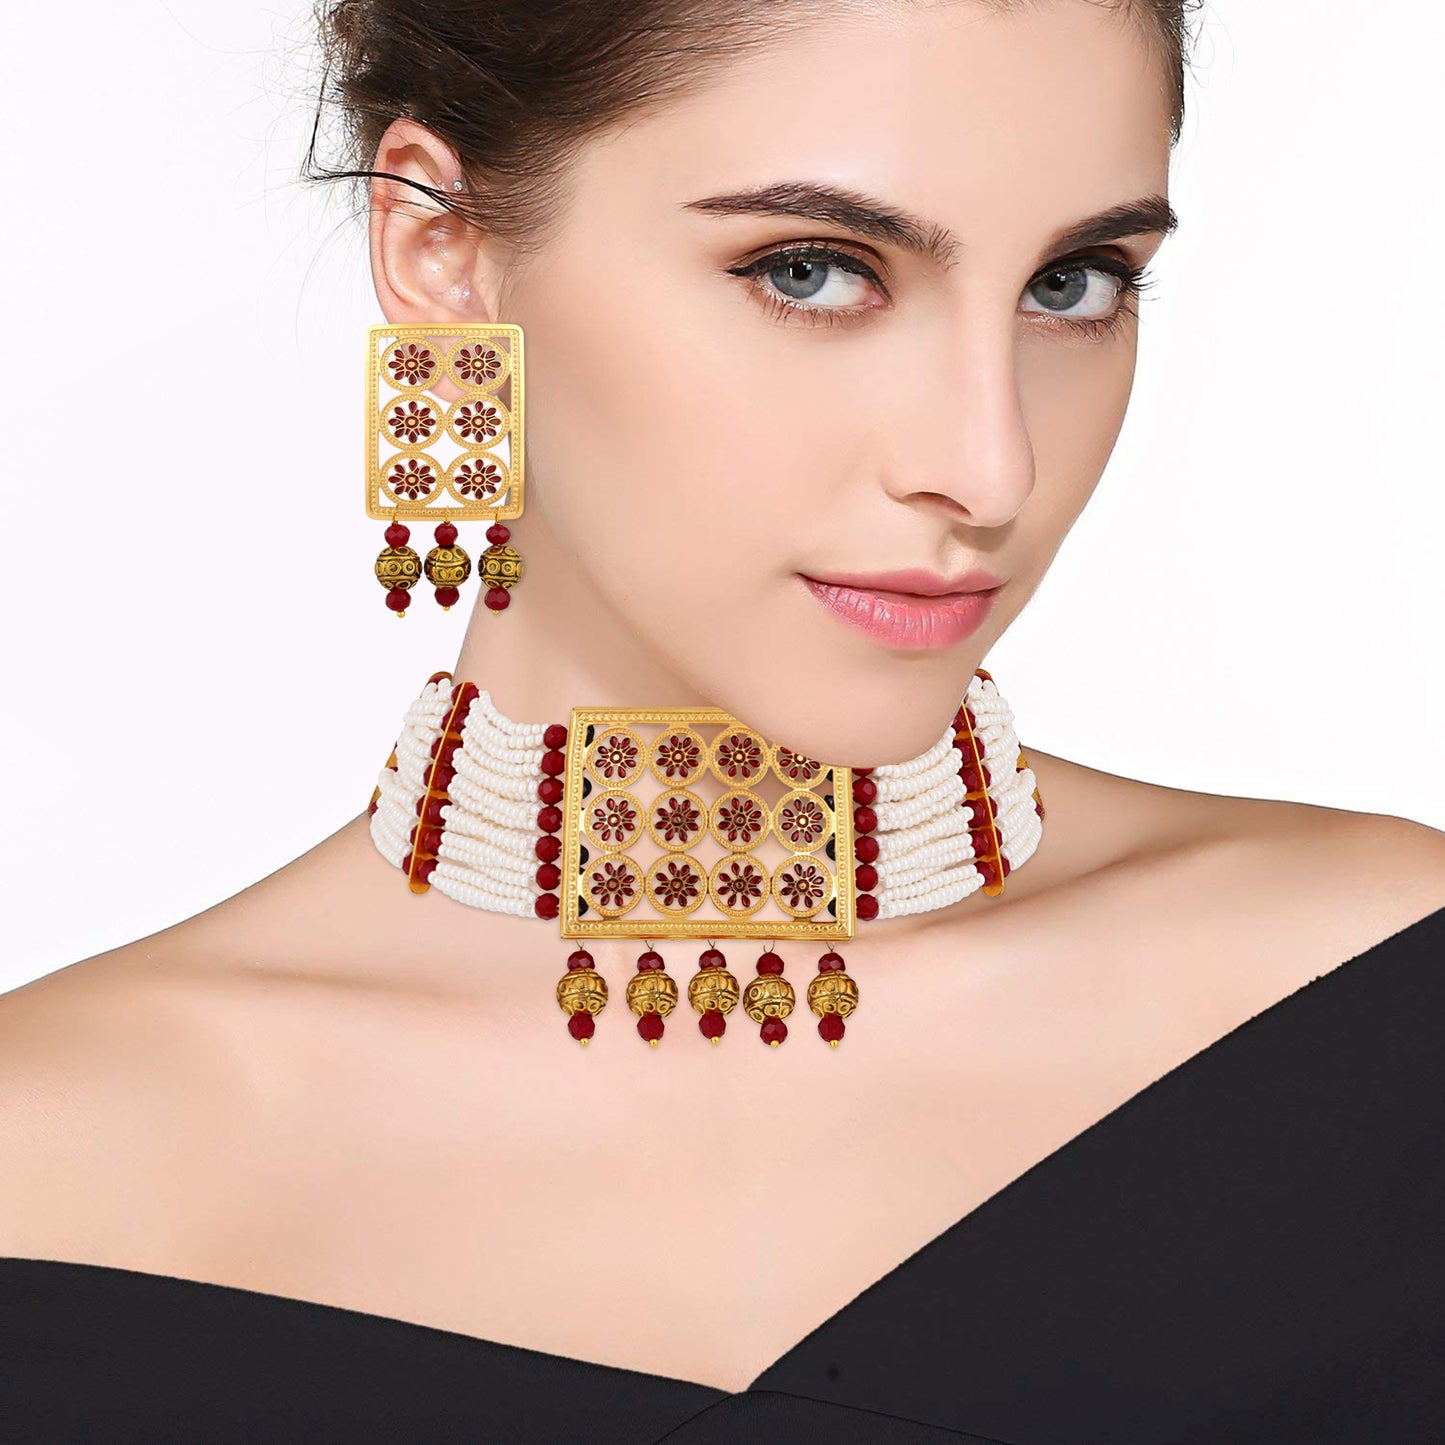 Bdiva 18K Gold Plated Intricately Carved Red Beads Rectangular Choker Necklace.